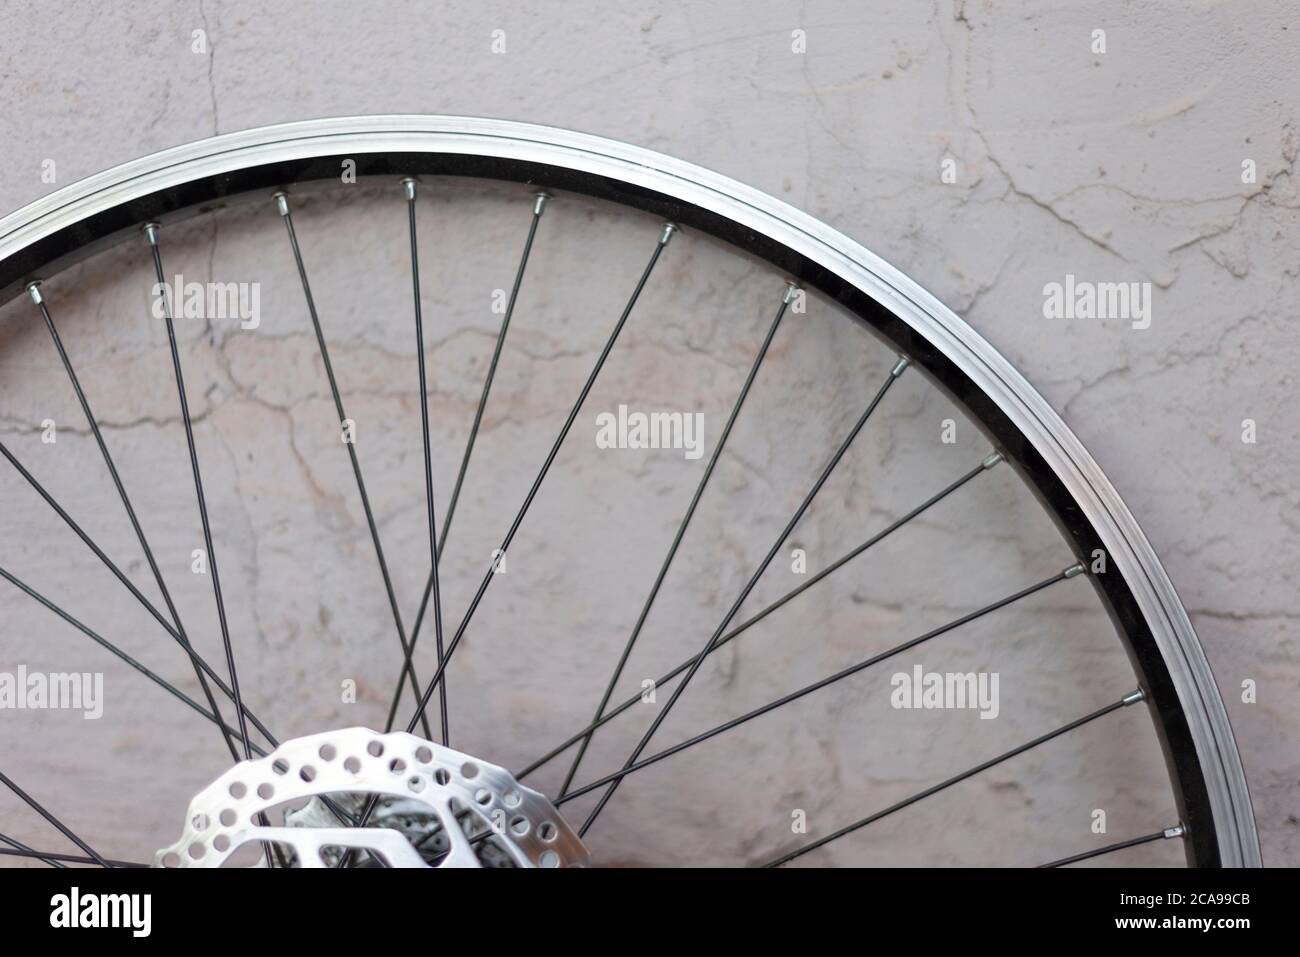 a double rim of a bicycle wheel without a tire, against a background of a textured eraser. Bicycle wheel repair, hub, bicycle iron rim Aluminum bicycl Stock Photo